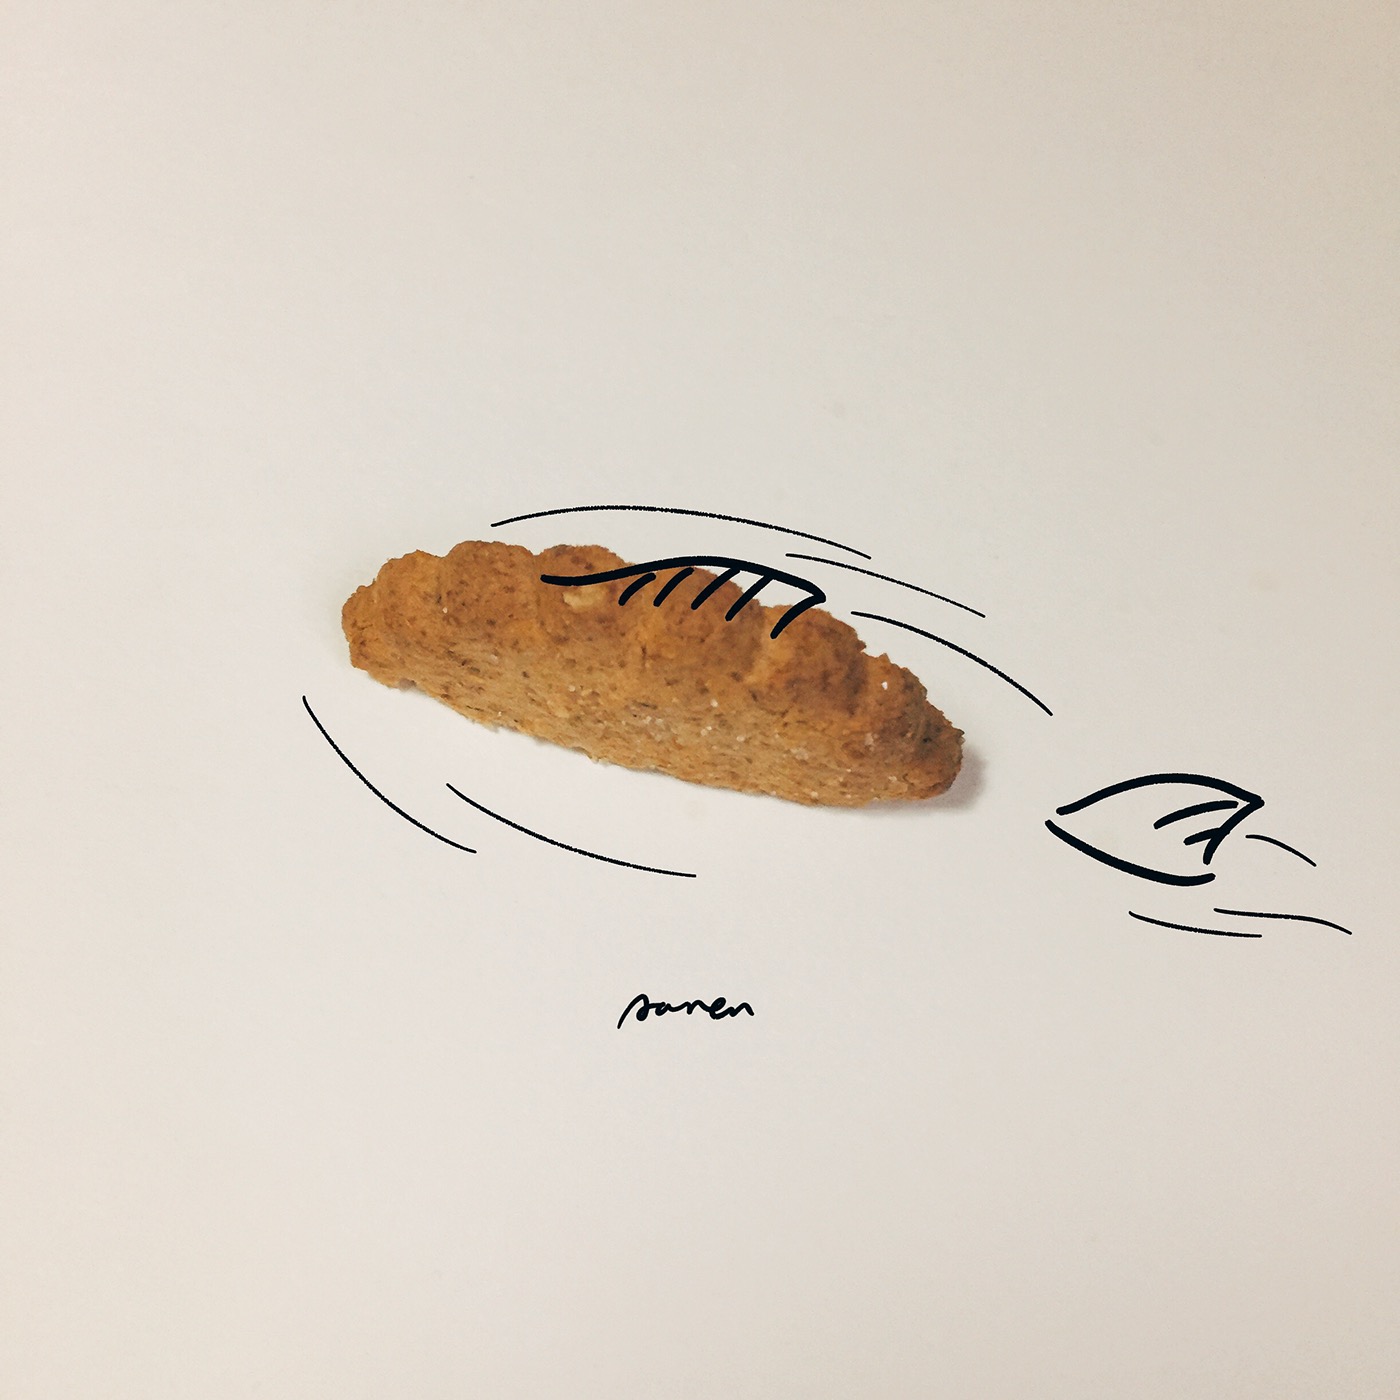 I only have half a cookie. on Behance